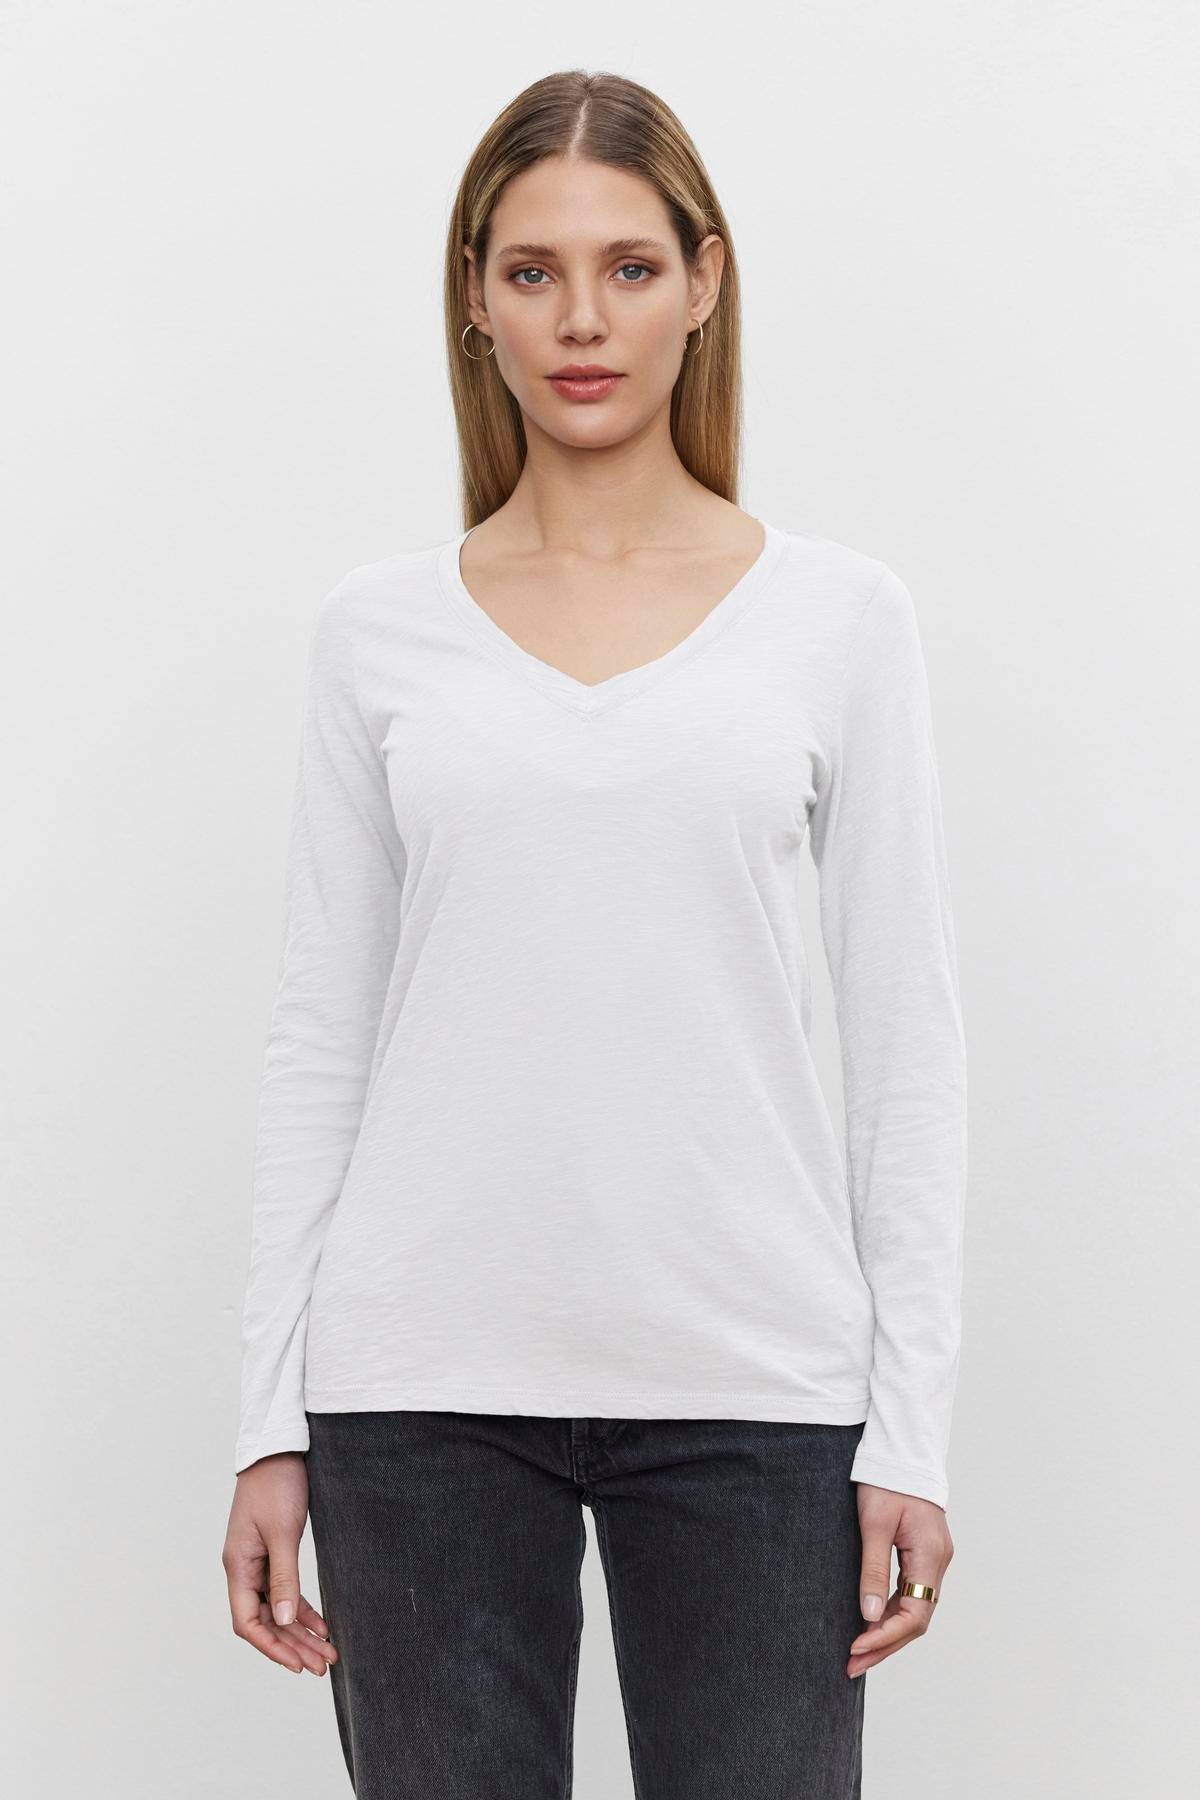   A person with long hair wearing a white BLAIRE TEE long-sleeve shirt made from textured cotton slub by Velvet by Graham & Spencer and dark jeans stands against a plain white background. 